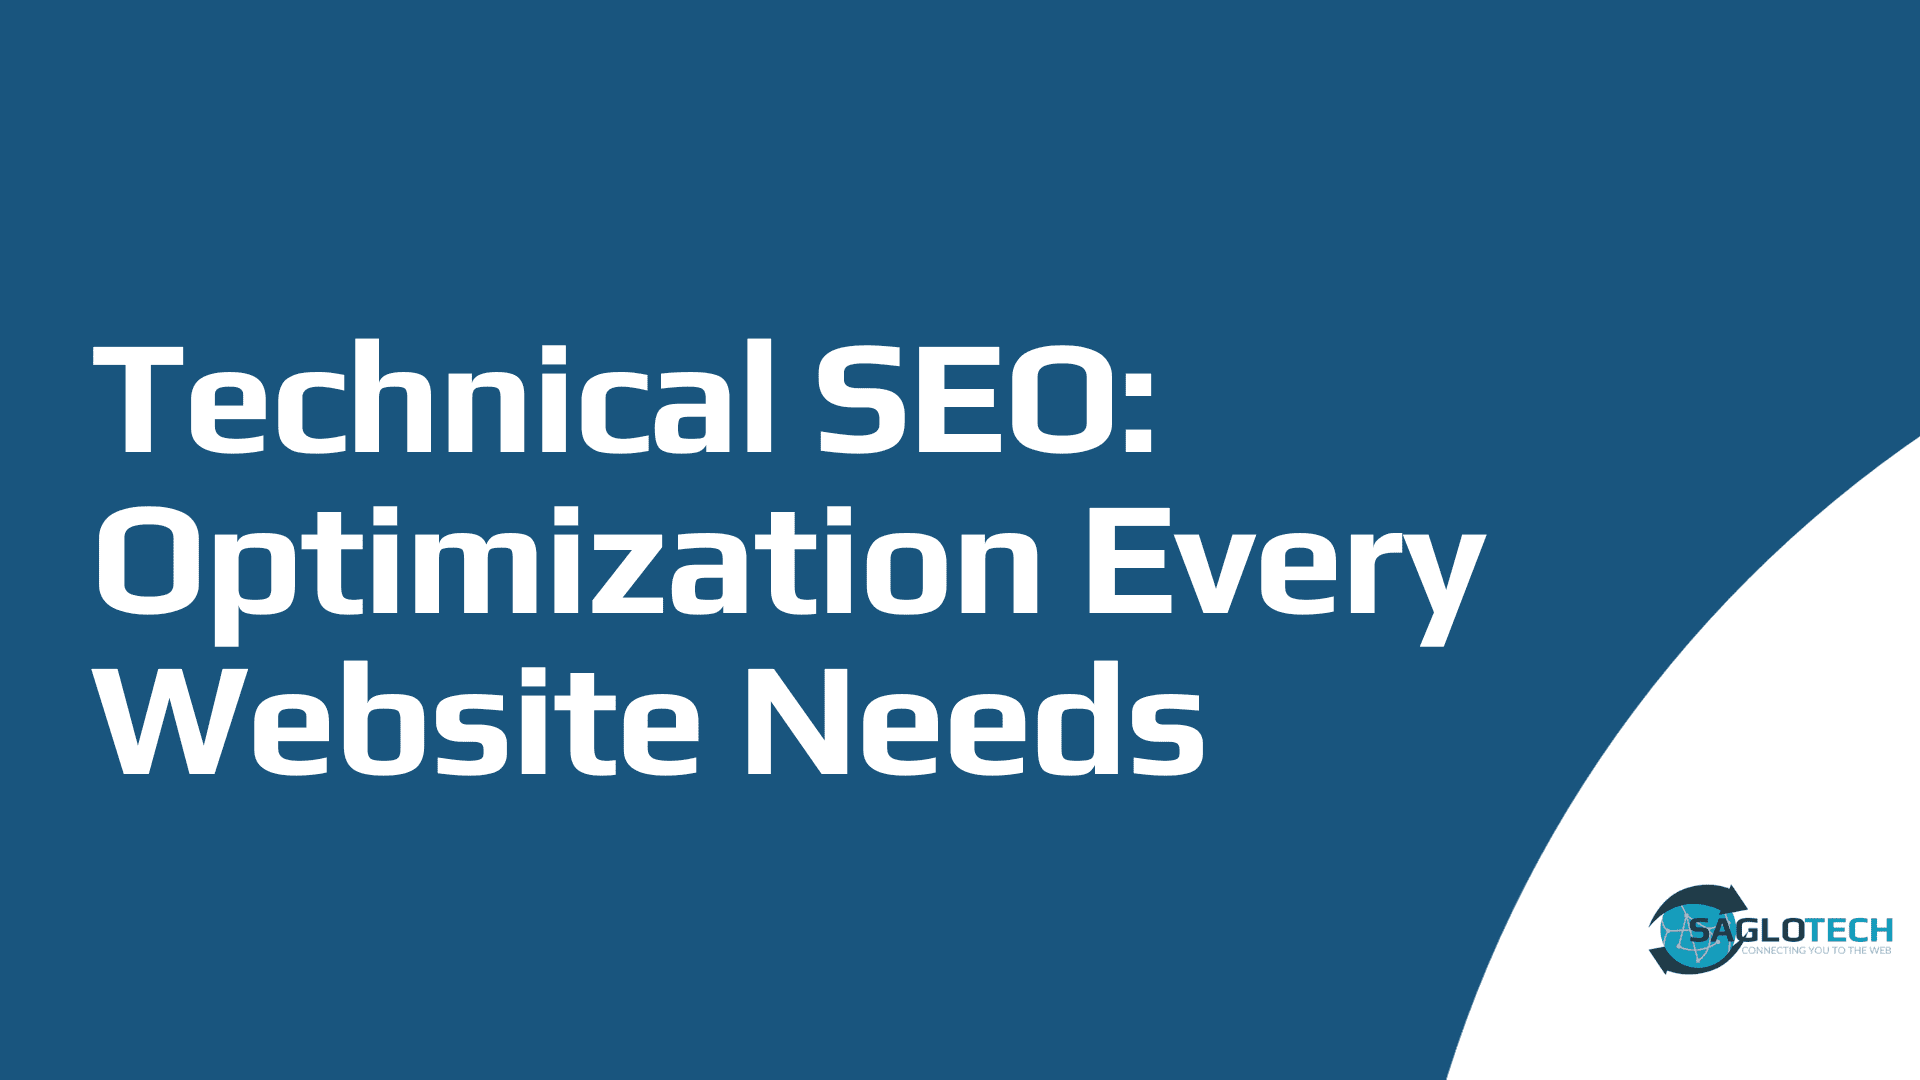 Technical SEO: The Behind-the-Scenes Optimization Every Website Needs